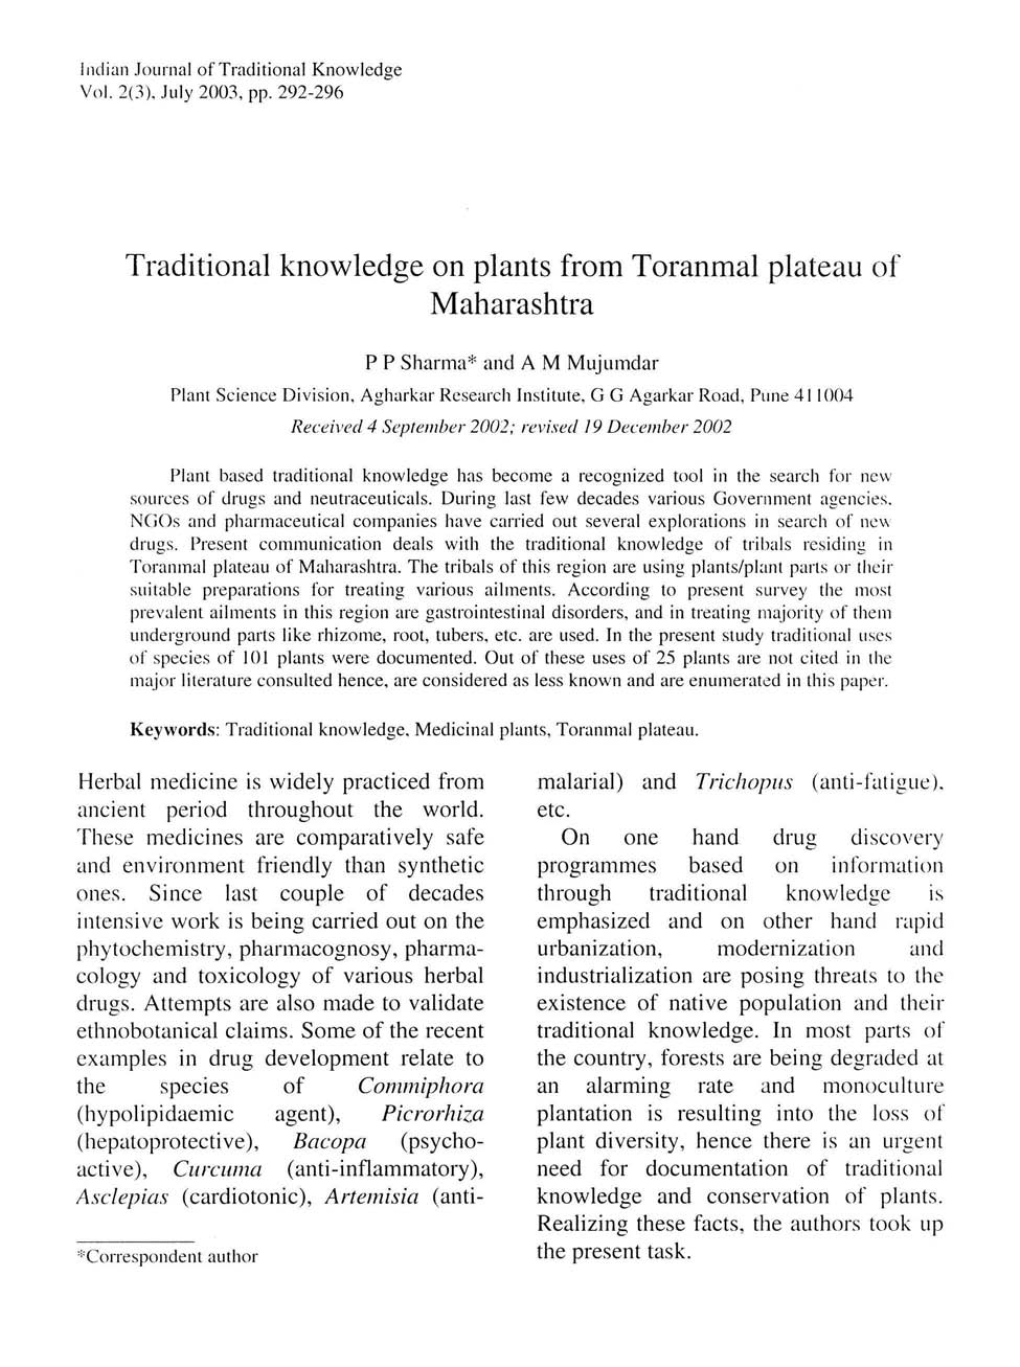 Traditional Knowledge on Plants from Toranmal Plateau of Maharashtra